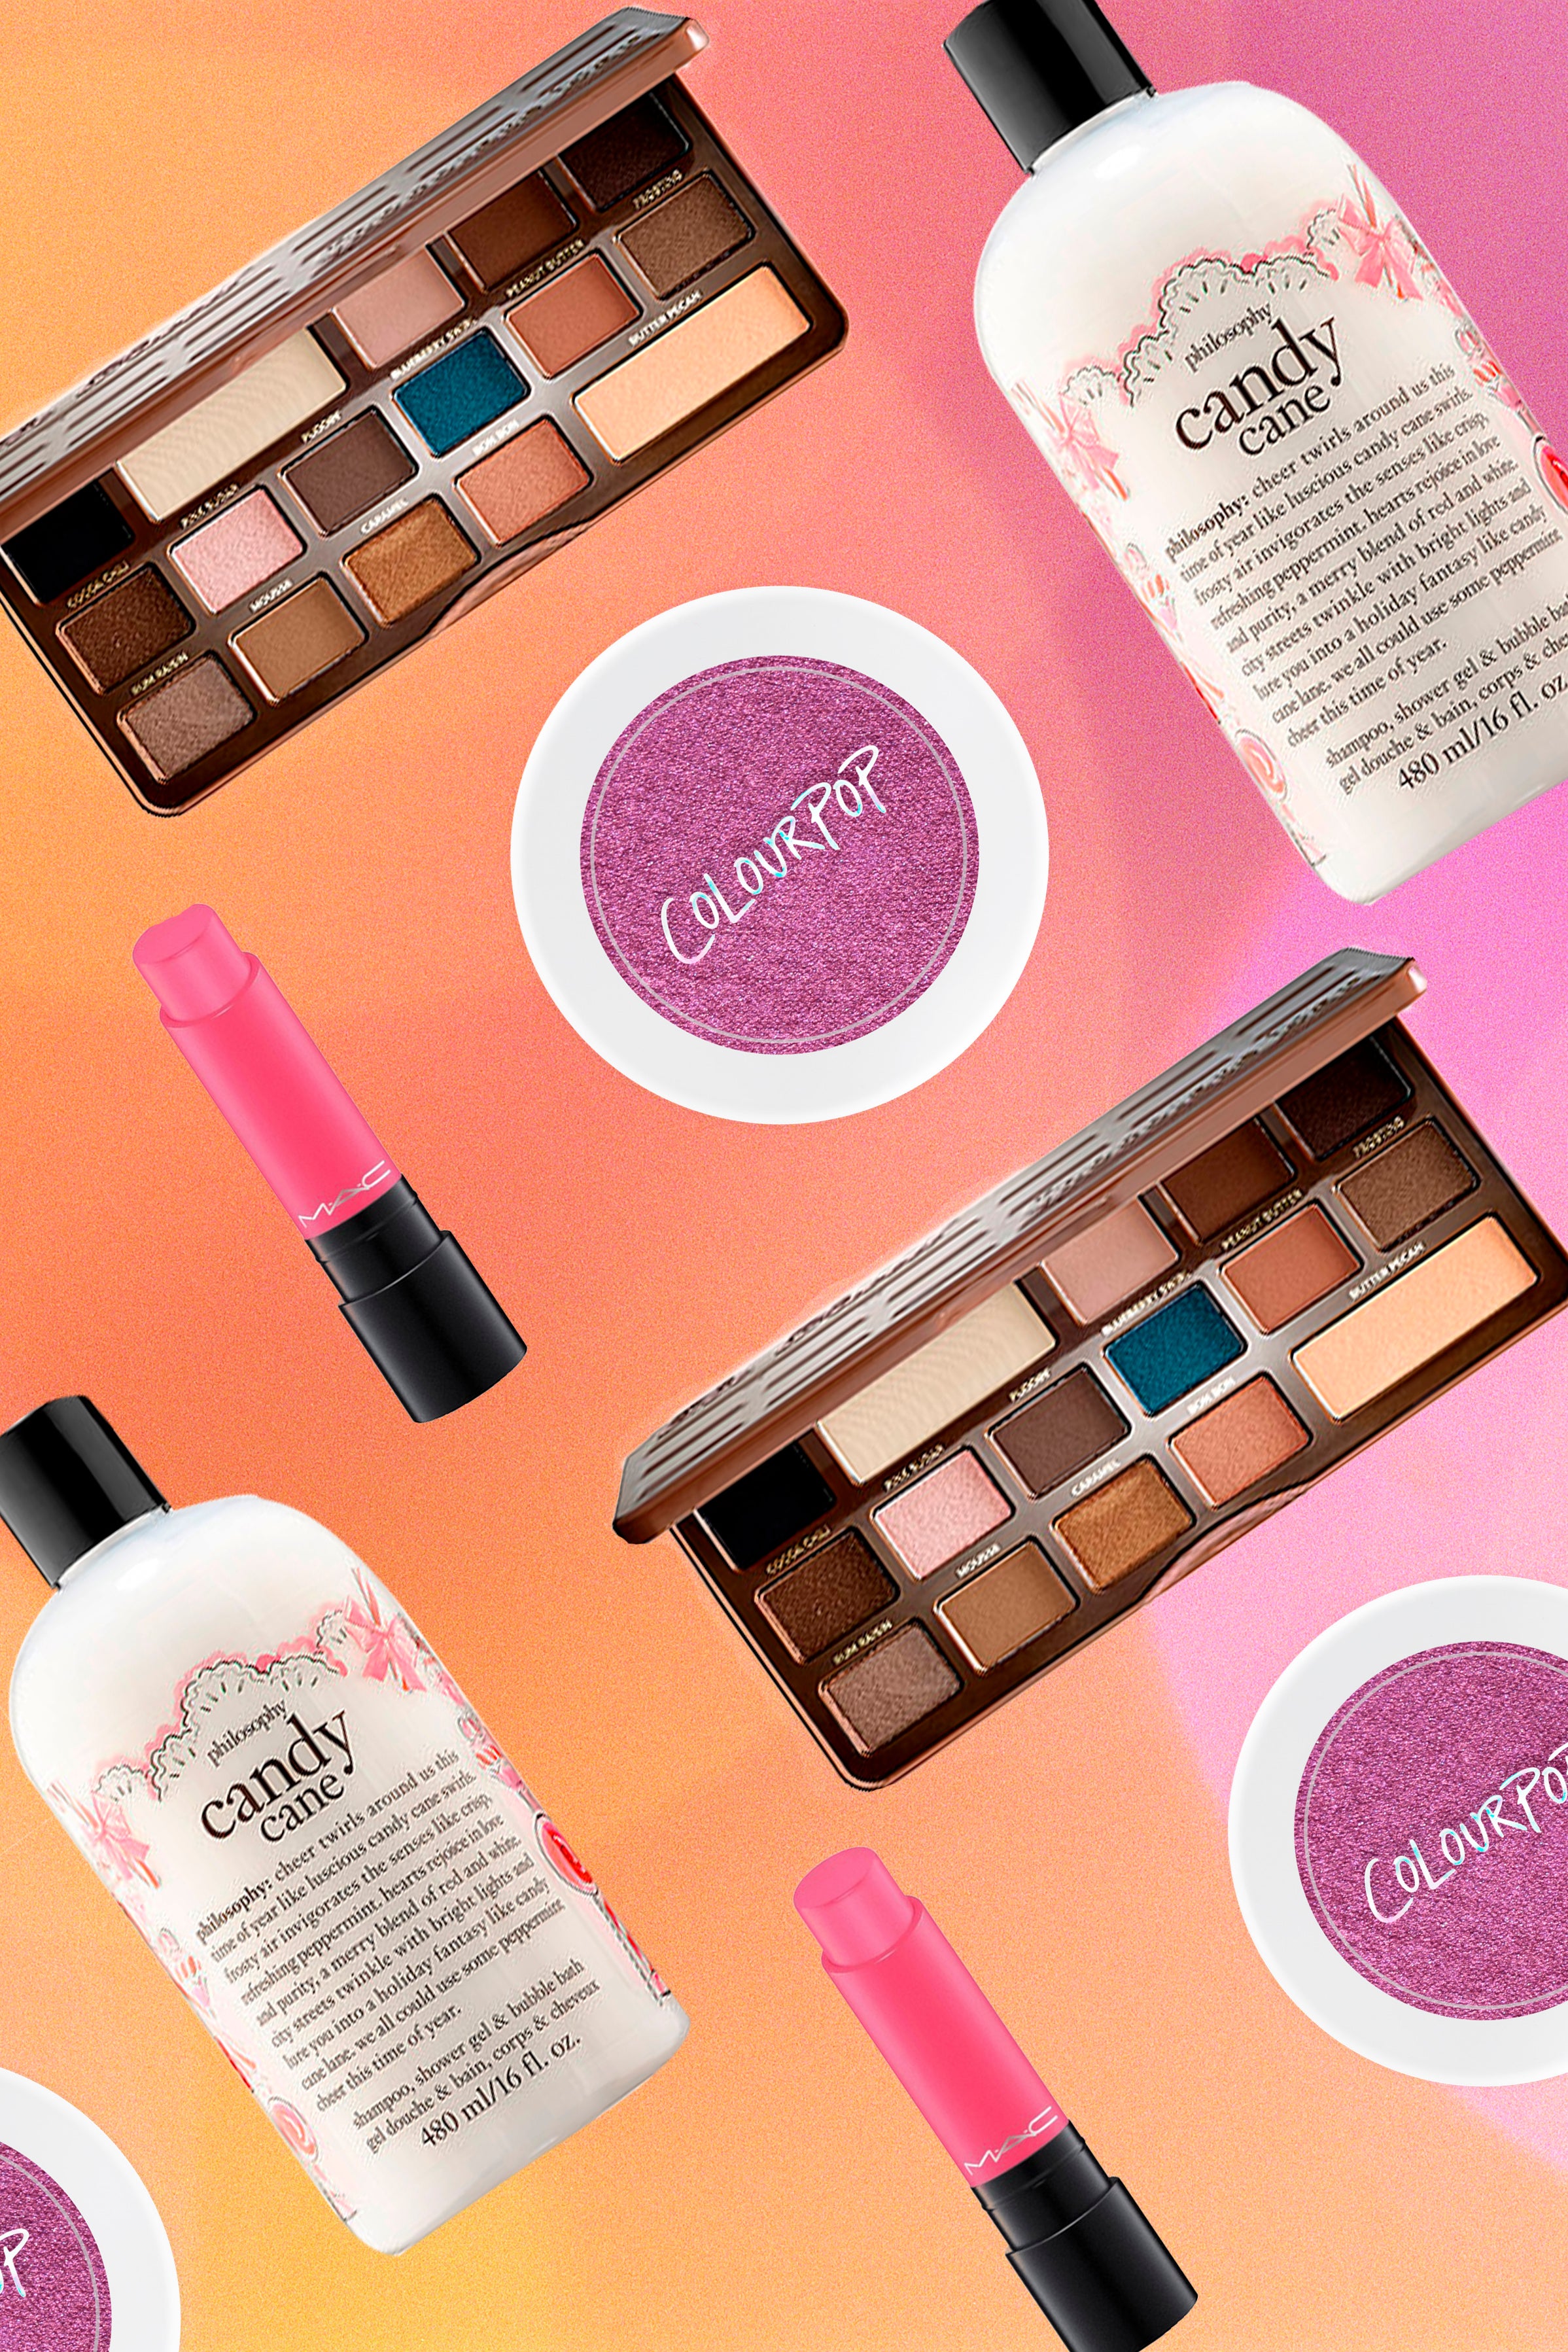 18 Sinfully Sweet Beauty Products That Make Getting Ready A Treat
